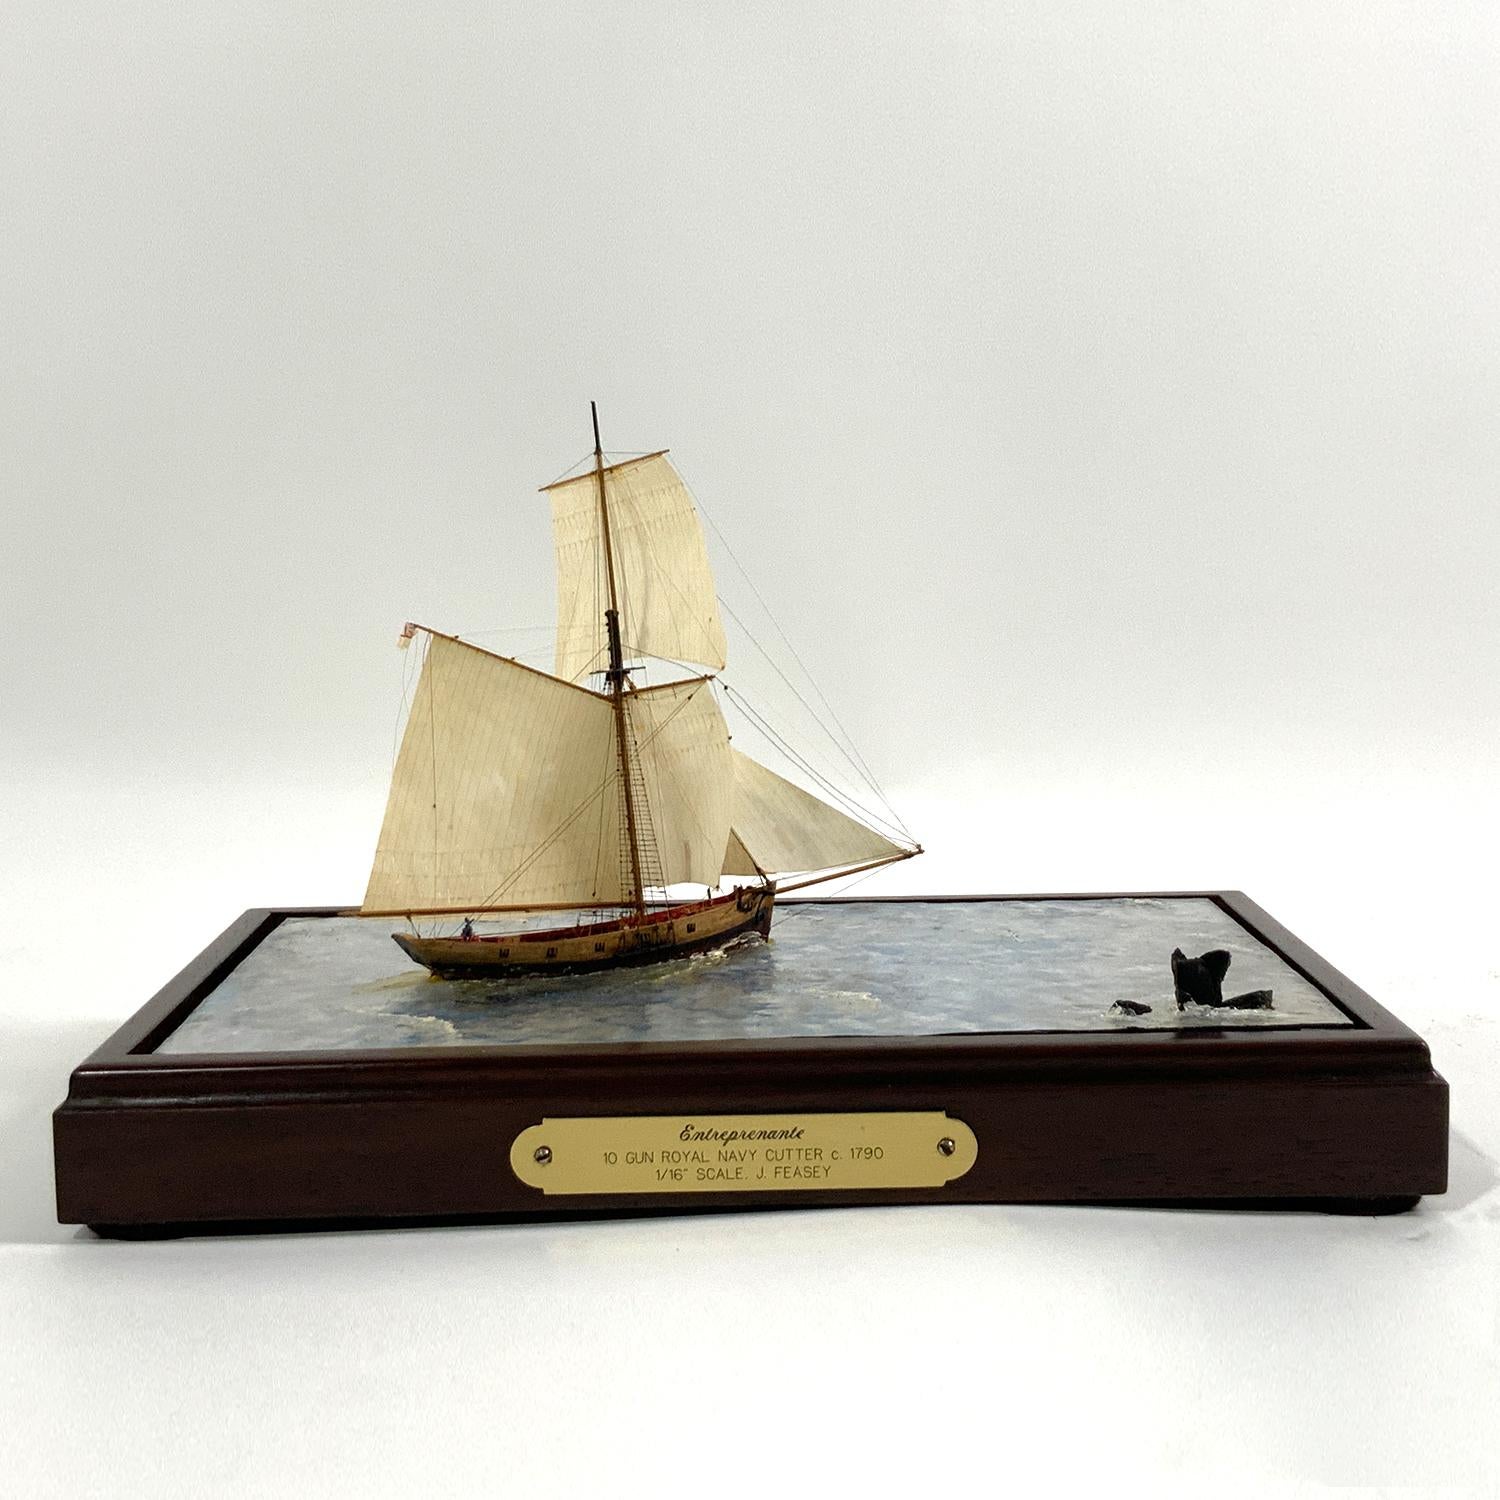 Clear water diorama showing the Ten Gun Royal Navy Cutter, Entreprenante Circa 1790. The model is built to a scale of one sixteenth inch equals one foot. The vessel appears to be sailing through deep clear water. An exceptional technique where